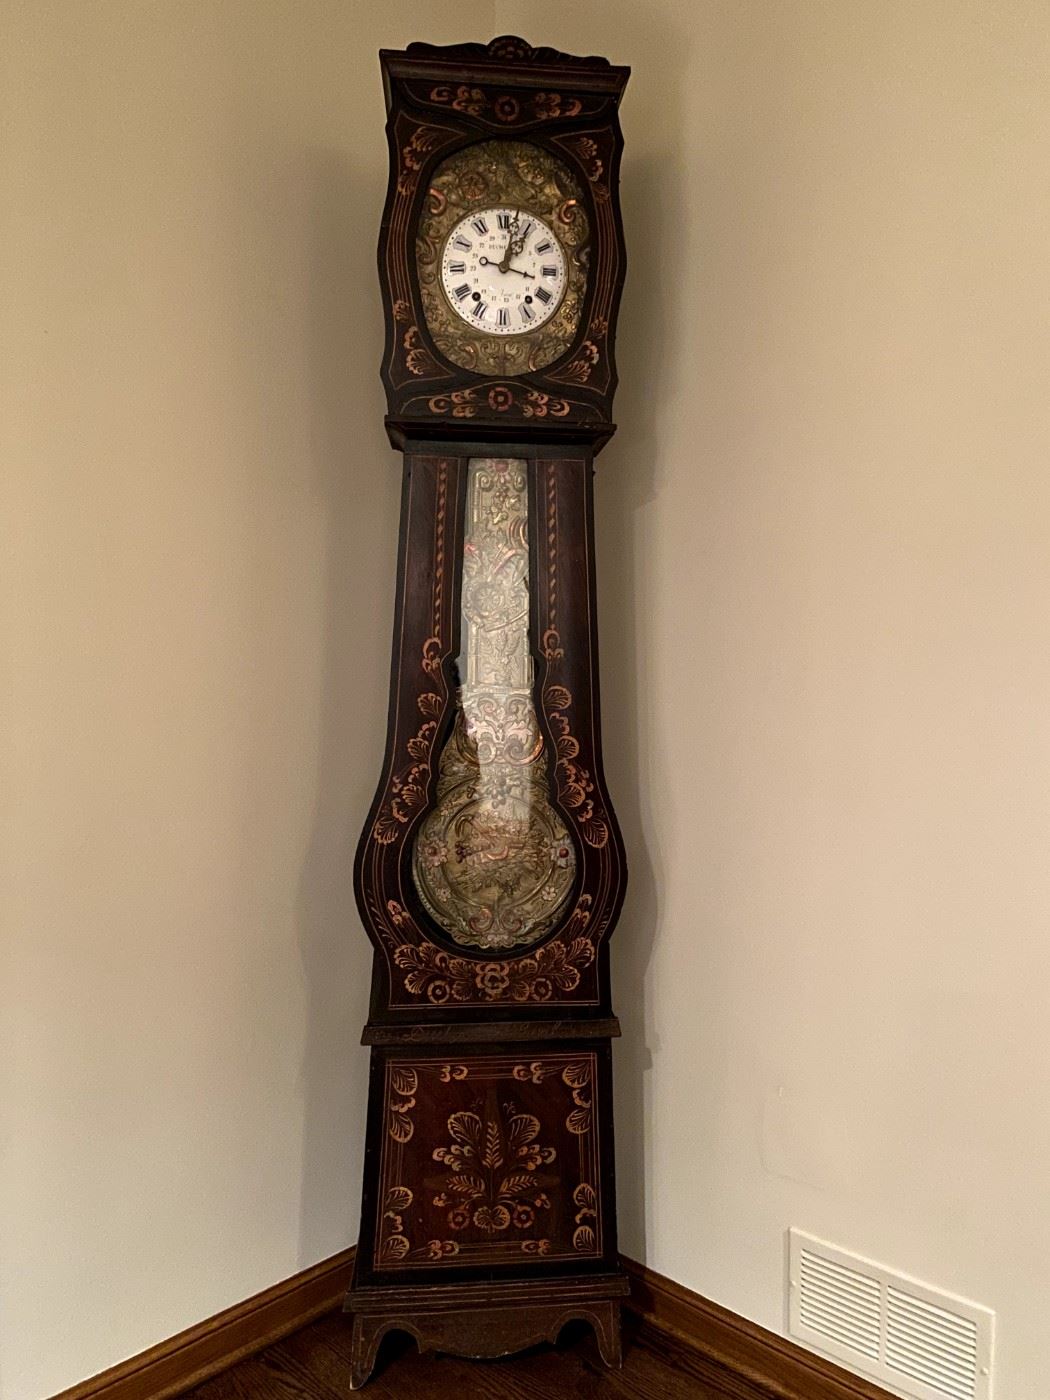 French Comtoise Grandfather Clock with Automated Pendulum    BUY IT NOW  $2,500.00     Seven Day Morbier movement, enamel face signed,   89" T, 19.25"W, 8.25"D   